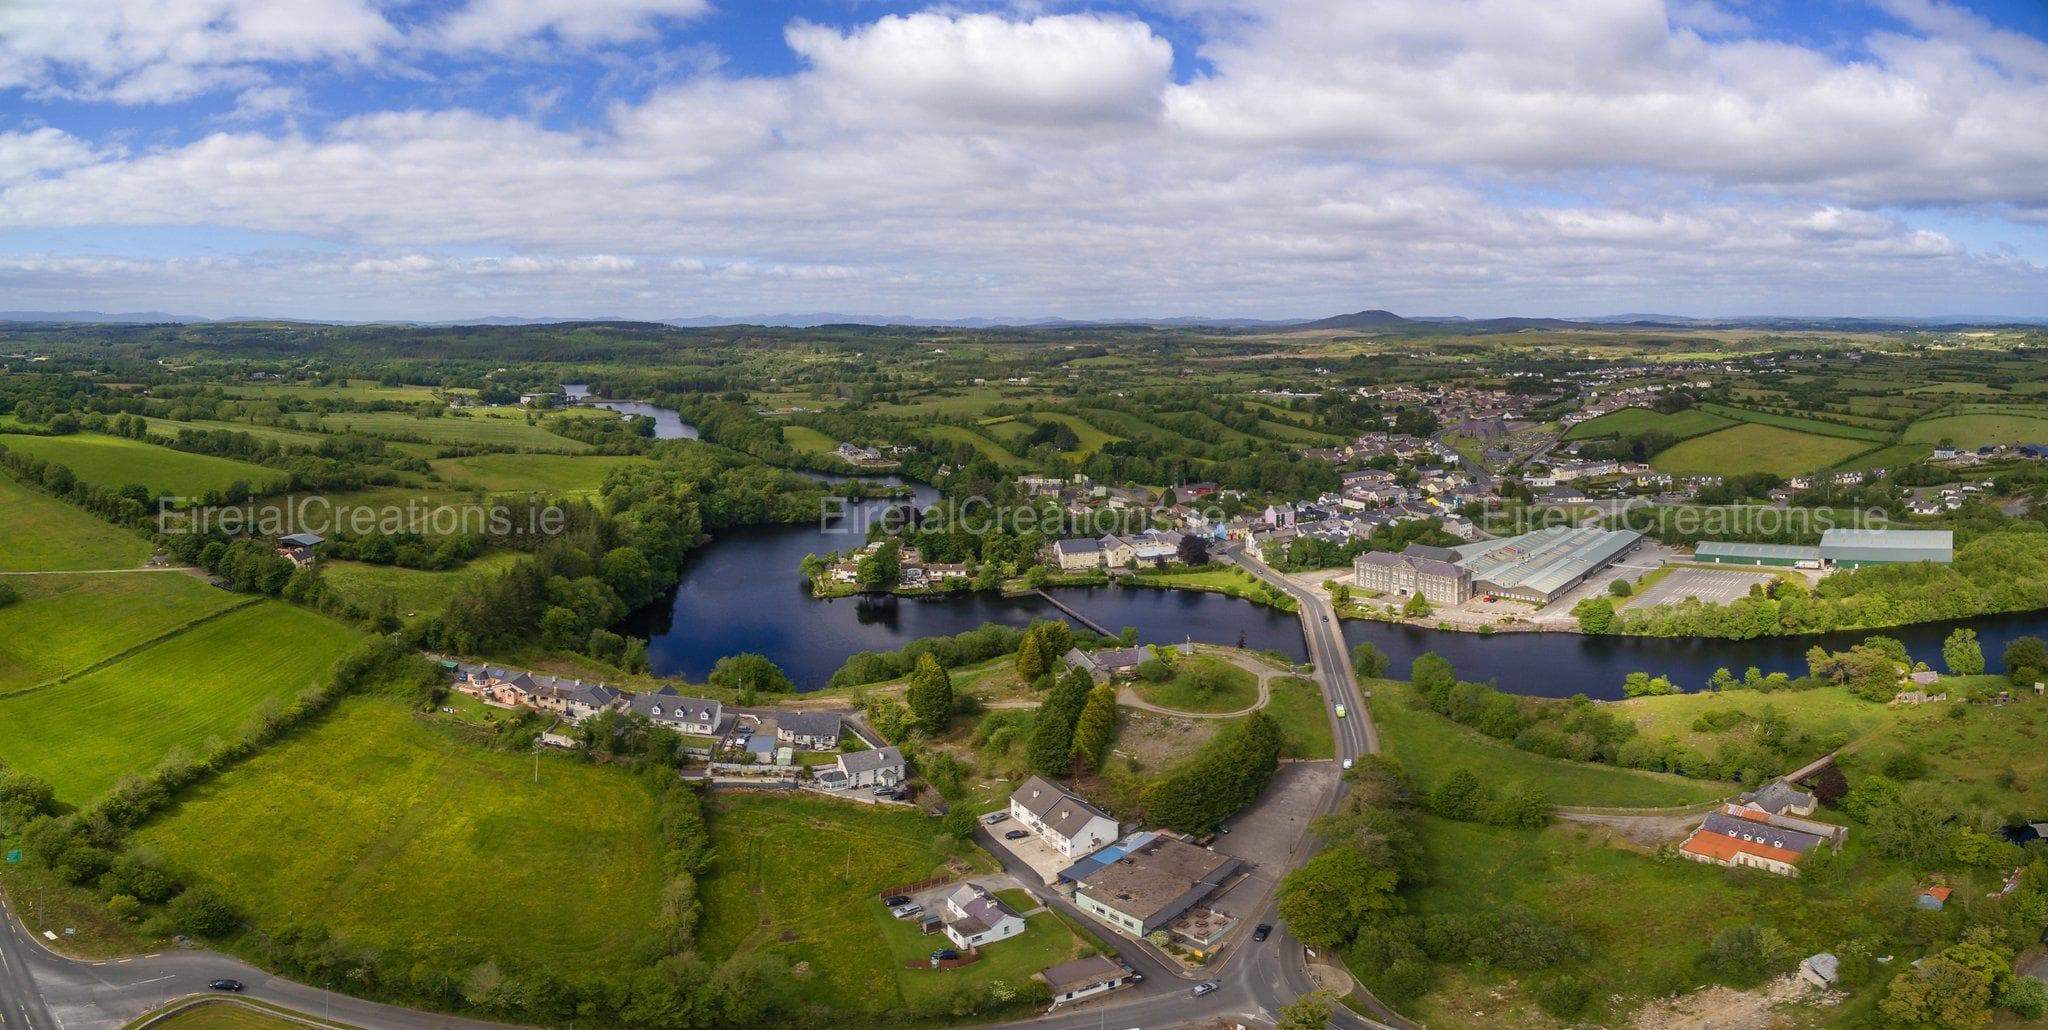 A Panoramic view of Belleek, Fermanagh.